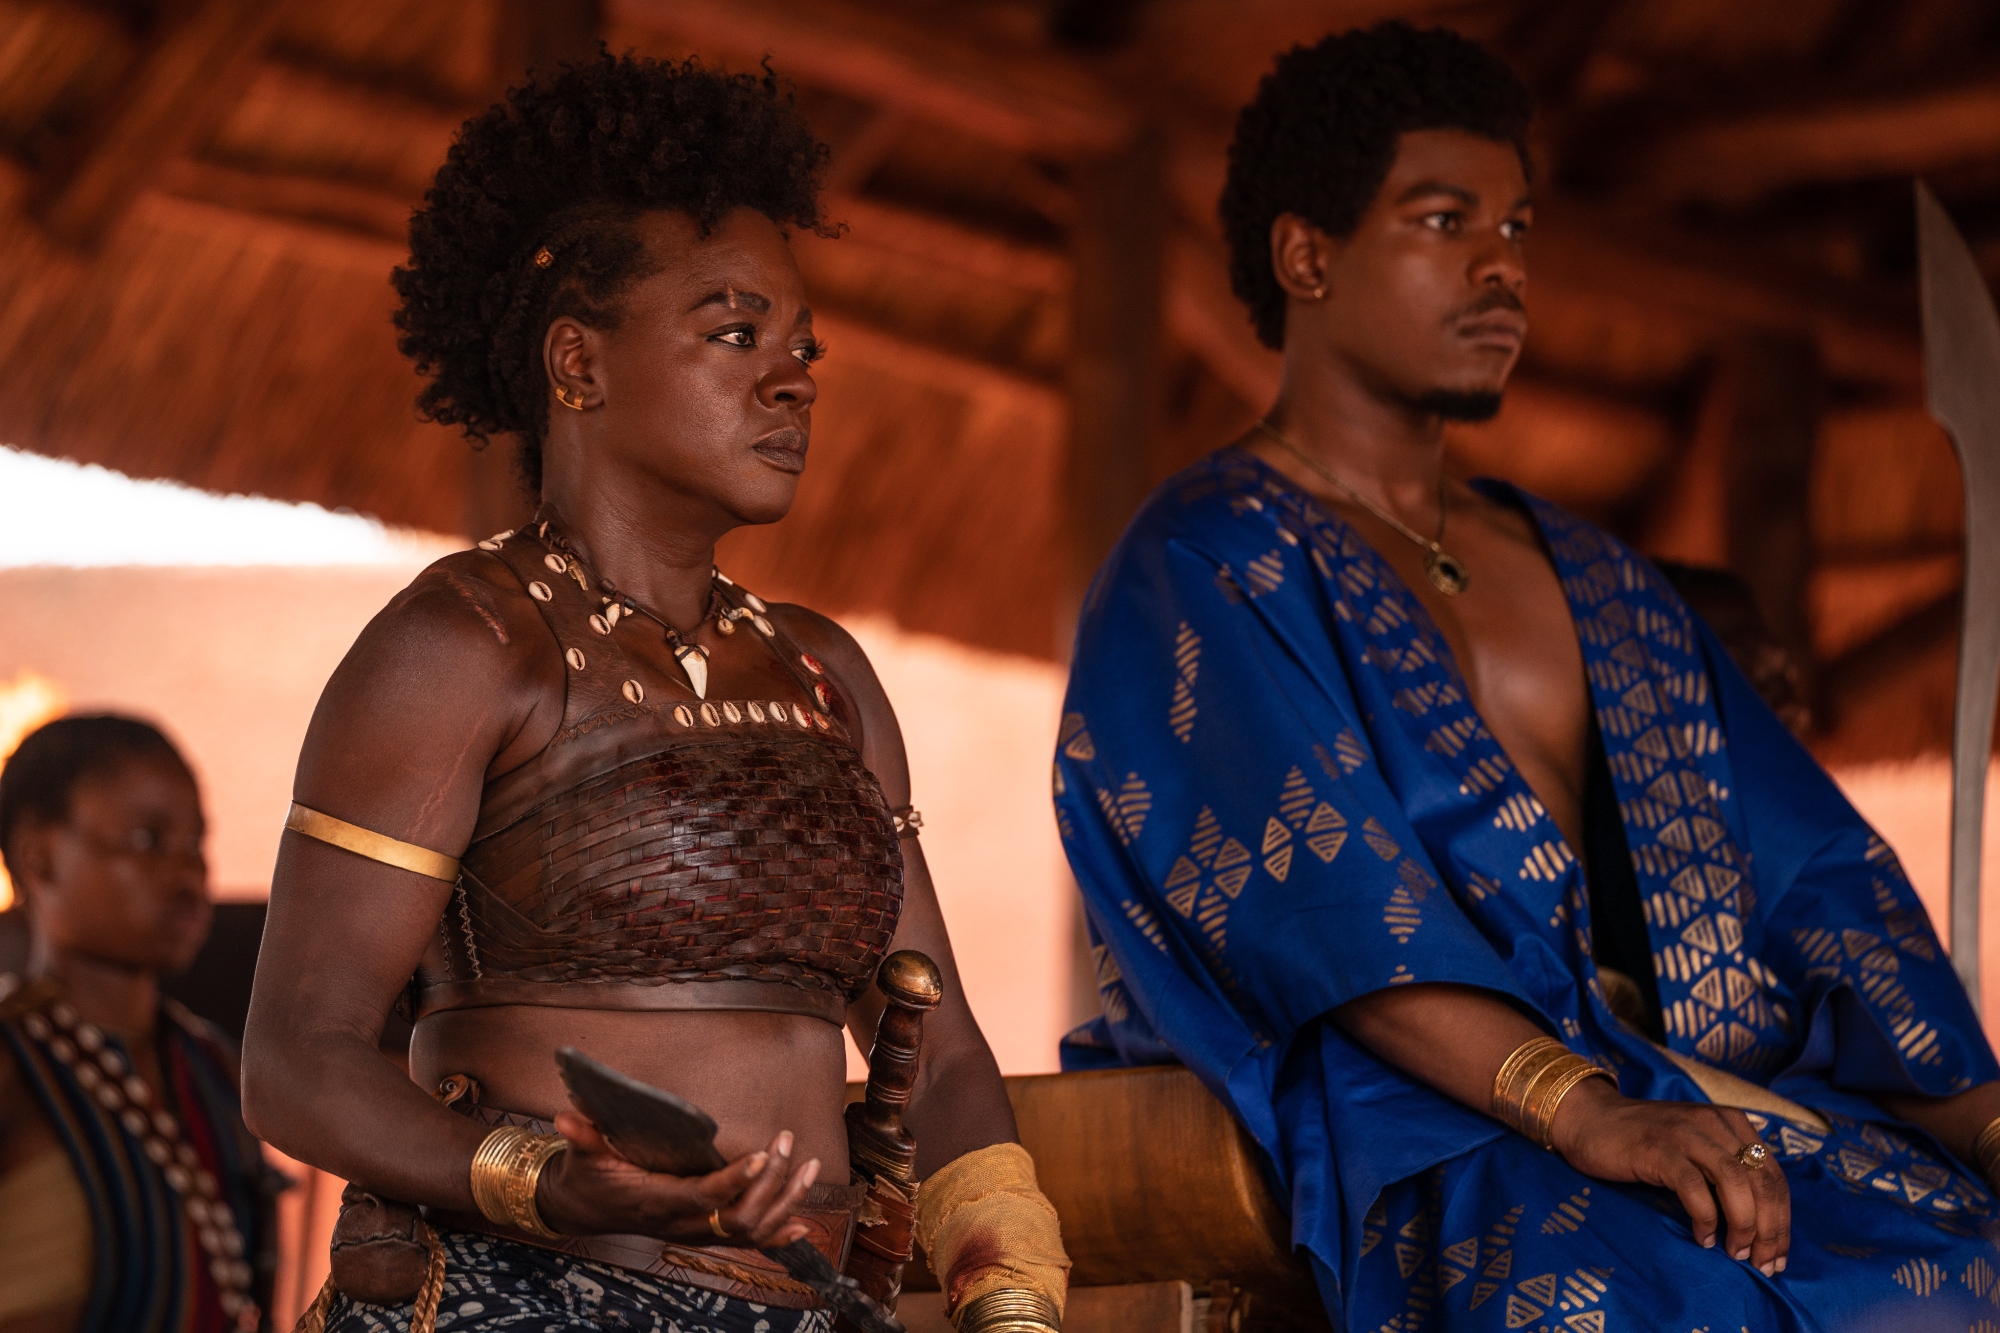 'The Woman King' Viola Davis as Nanisca and John Boyega as King Ghezo. They sit under a shade covering, looking ahead.